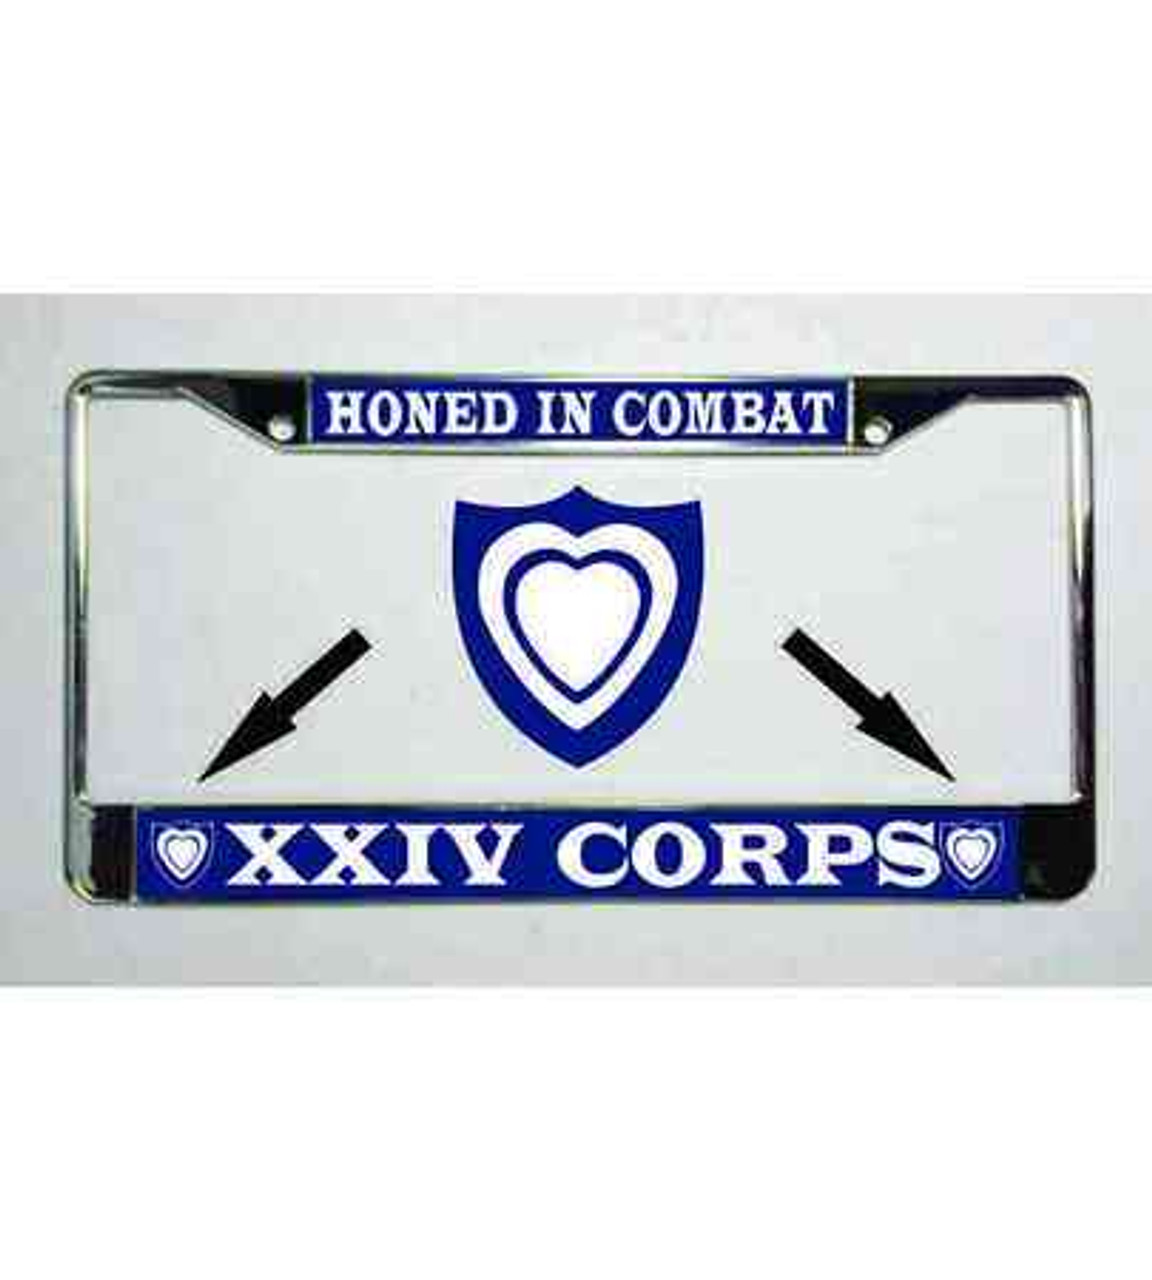 army xxiv 24th corps honed in combat license plate frame